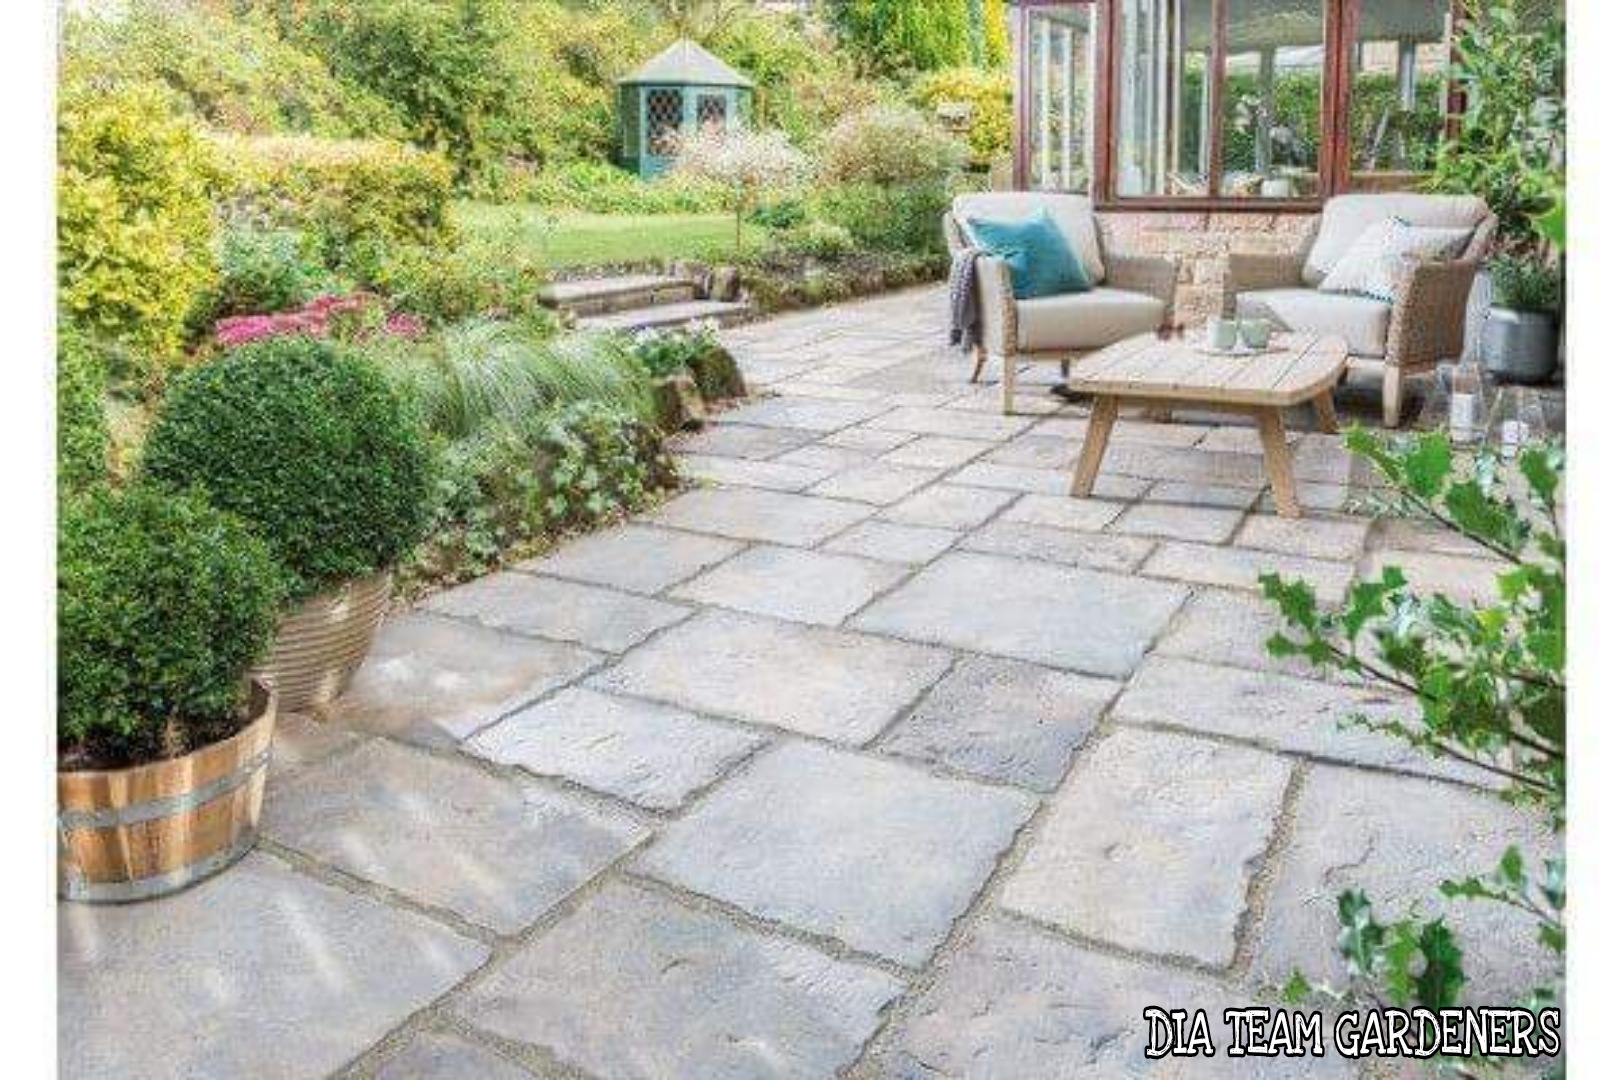 How to successfully landscape your patio?